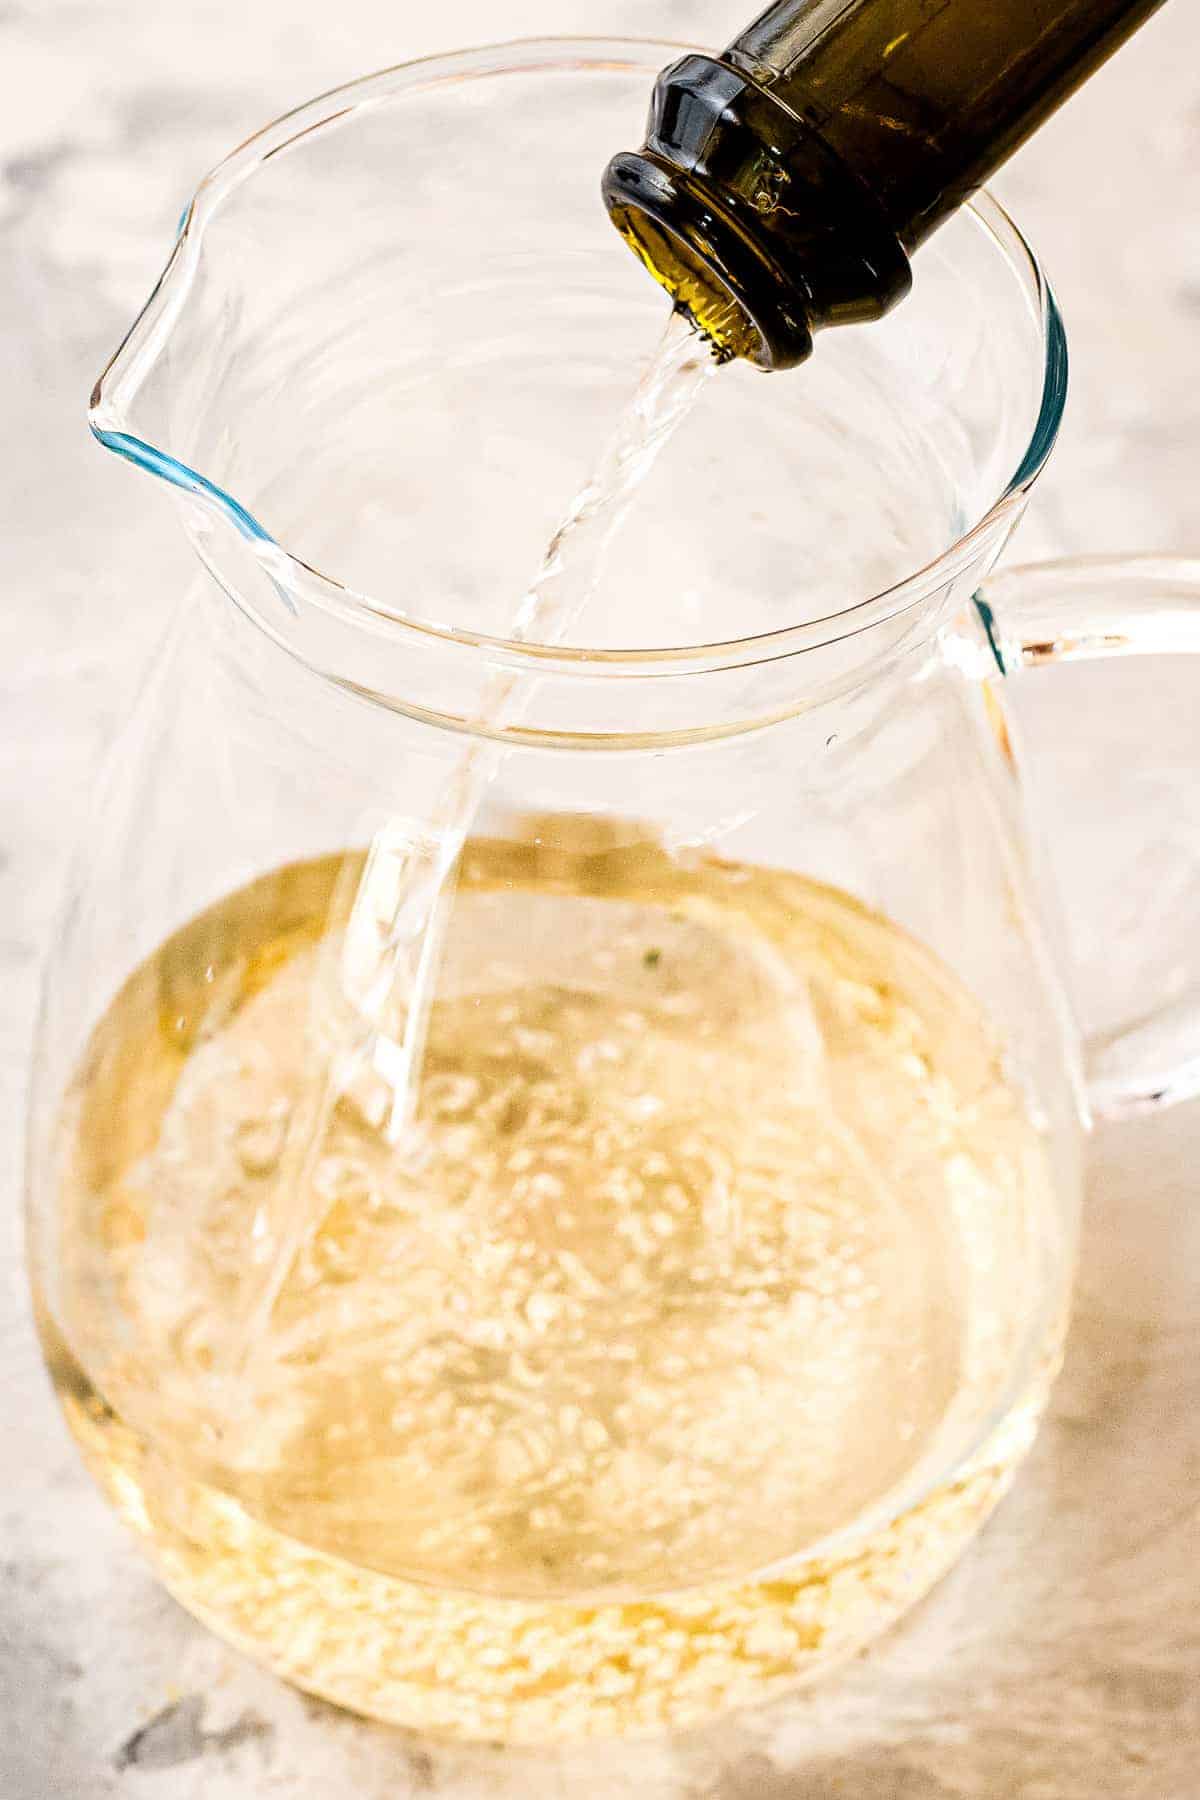 Pouring sparkling wine into a pitcher